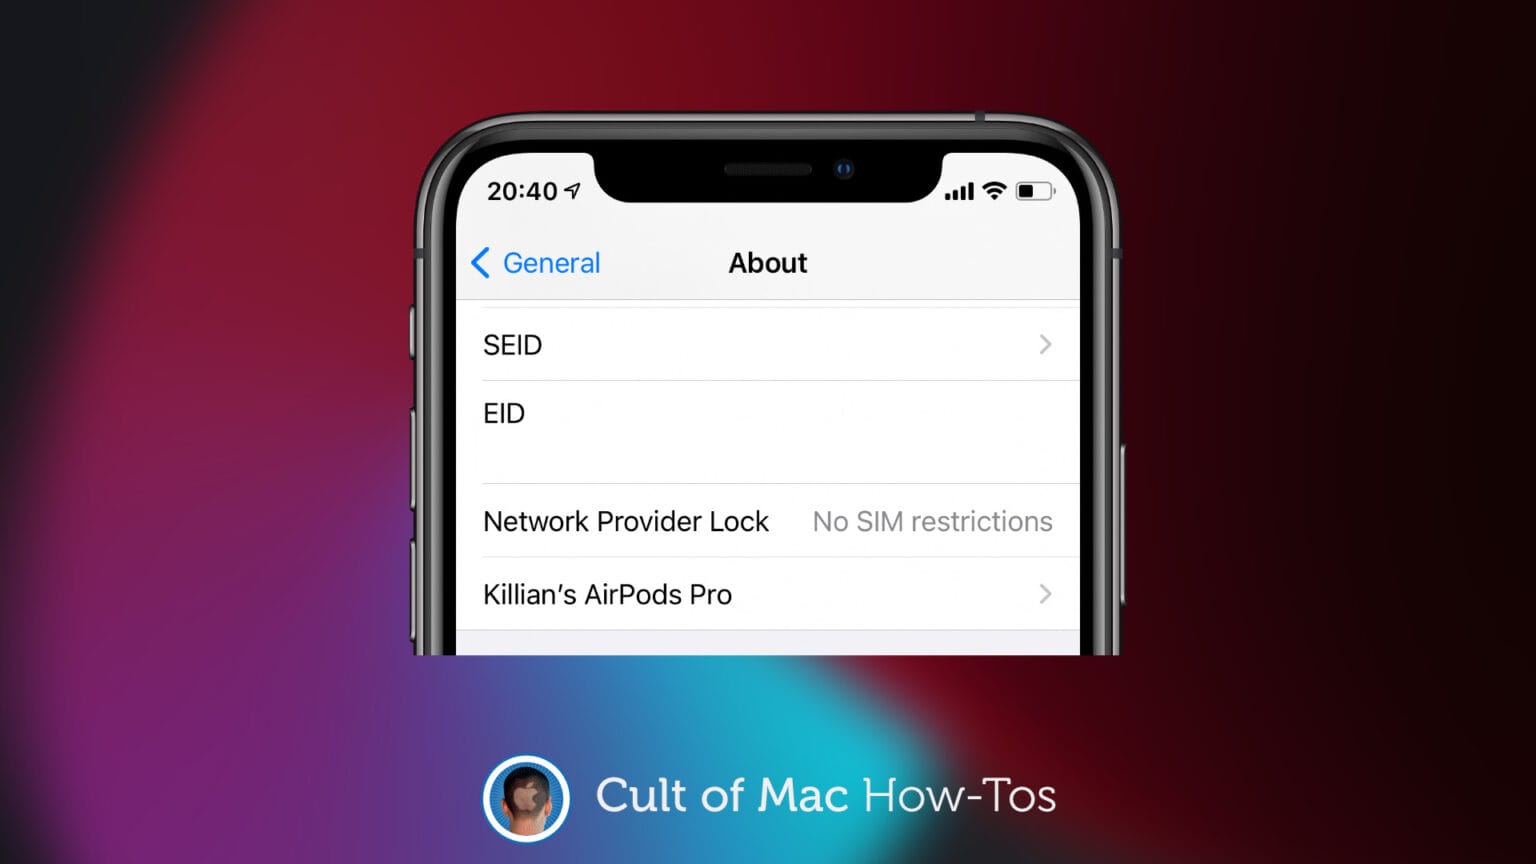 How to quickly find out if an iPhone is unlocked in iOS 14